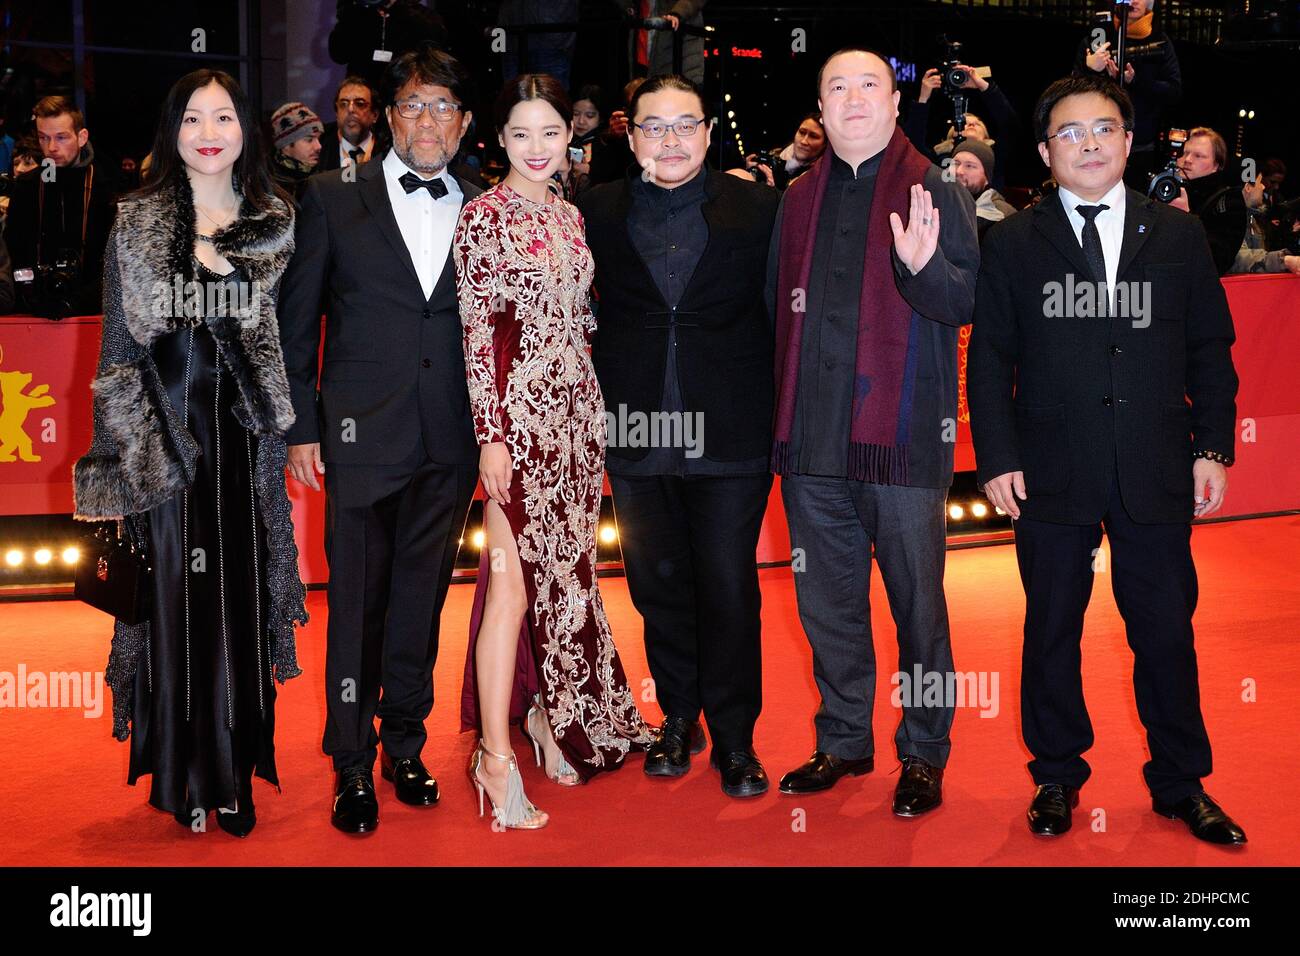 Mark Lee Ping-Bing (2nd L-cameraman of 'Chang Jiang Tu' awarded Silver Bear for Outstanding Artistic Contribution), Xin Zhi Lei (3rd L), director Yang Chao (3rd R) attending the Red Carpet before the Closing Ceremony during the 66th Berlinale, Berlin International Film Festival in Berlin, Germany on February 20, 2016. Photo by Aurore Marechal/ABACAPRESS.COM Stock Photo